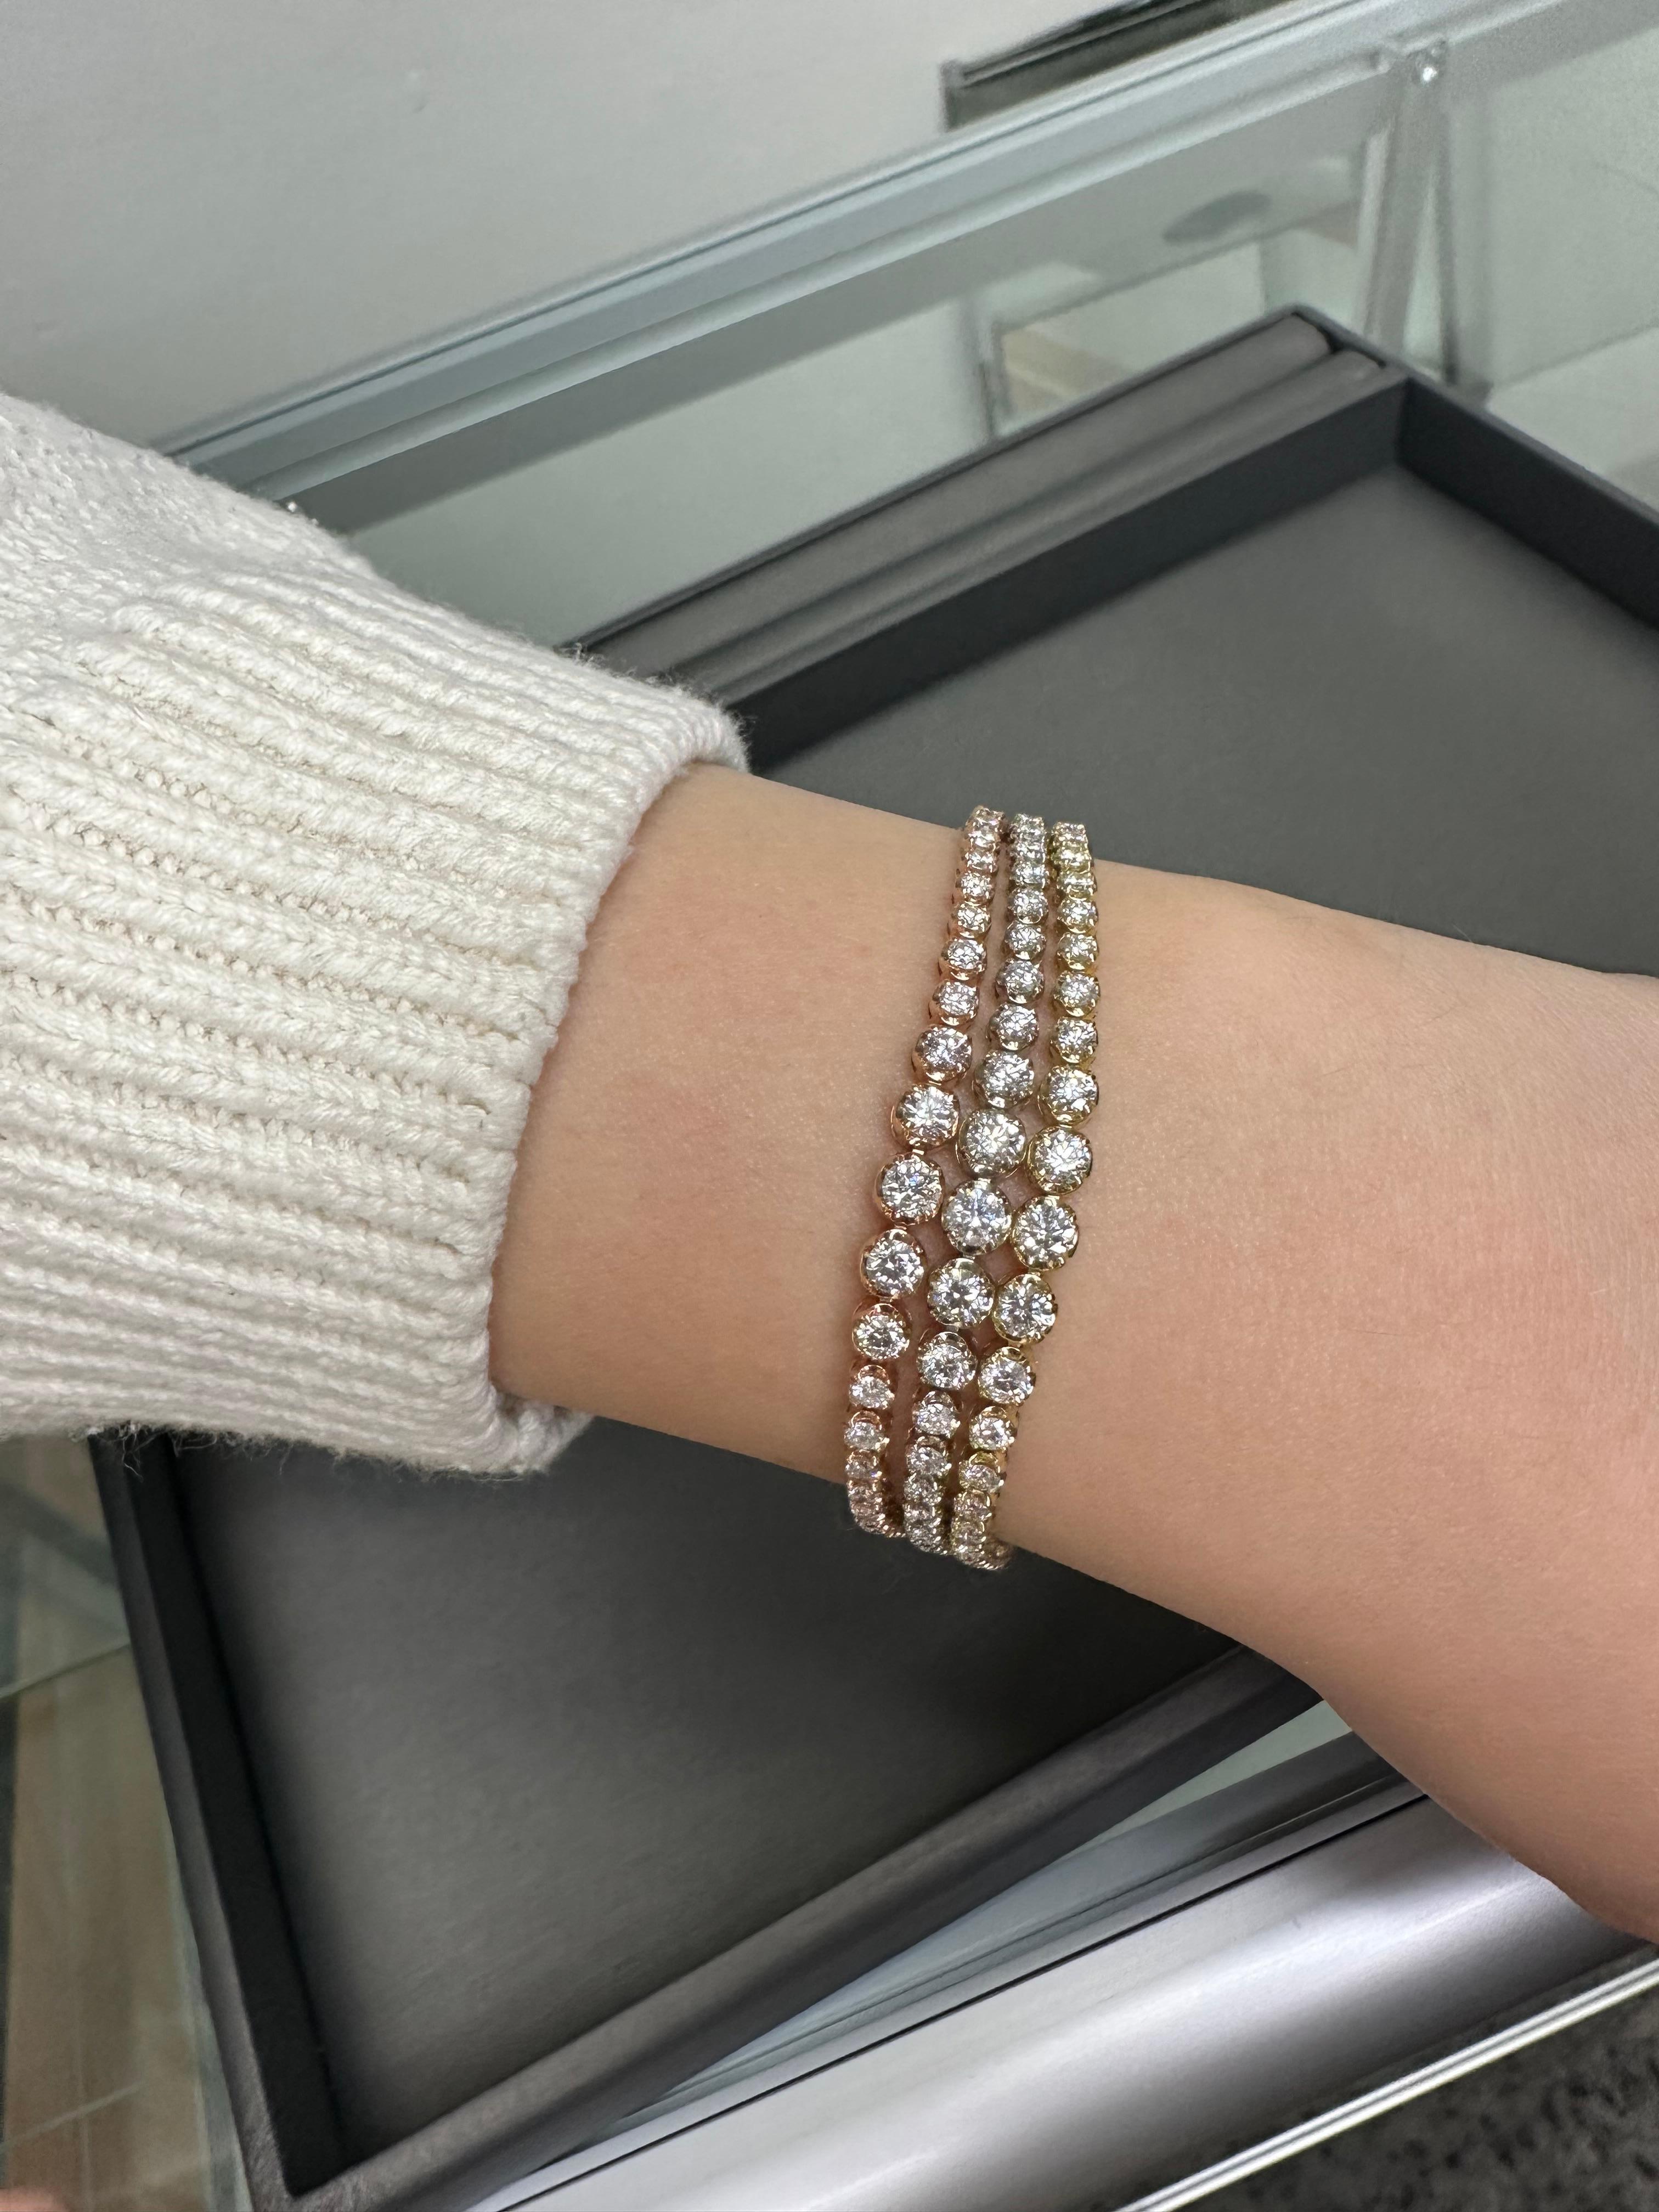 Introducing the breathtaking Triple Row Graduated Diamond Tennis Bracelet by Gem Jewelers Co. is a must-have for any Diamond Jewelry Enthusiast! This Tennis Bracelet boasts three rows of brilliant 7.10 Carat Diamonds in a Graduated setting, but